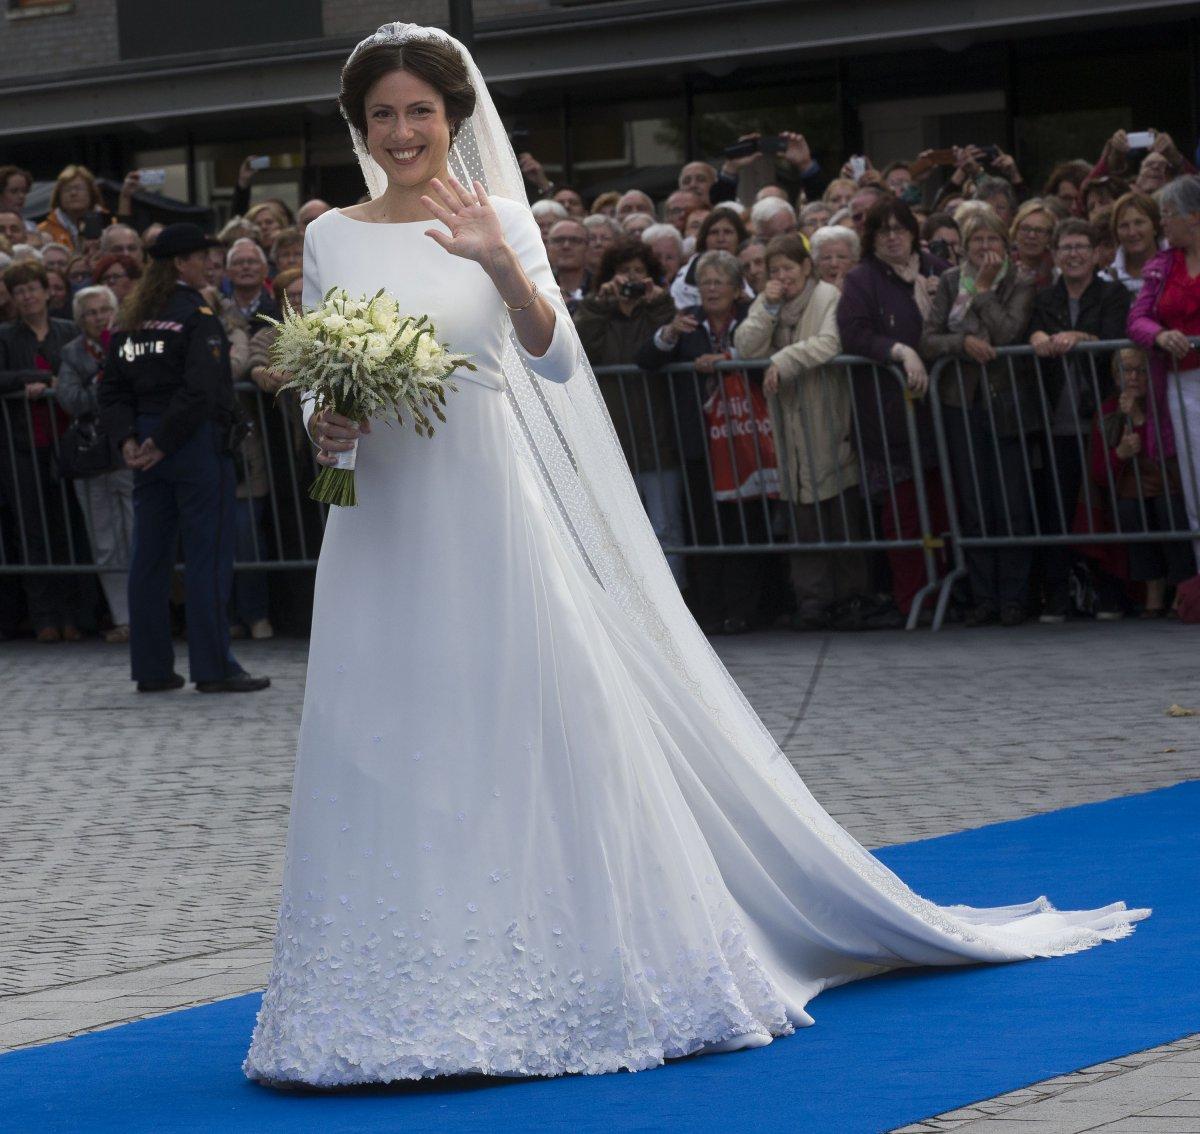 Viktoria Cservenyak arrives for her wedding with Prince Jaime de Bourbon Parme at The Church Of Our Lady At Ascension on October 5, 2013 in Apeldoorn, Netherlands.